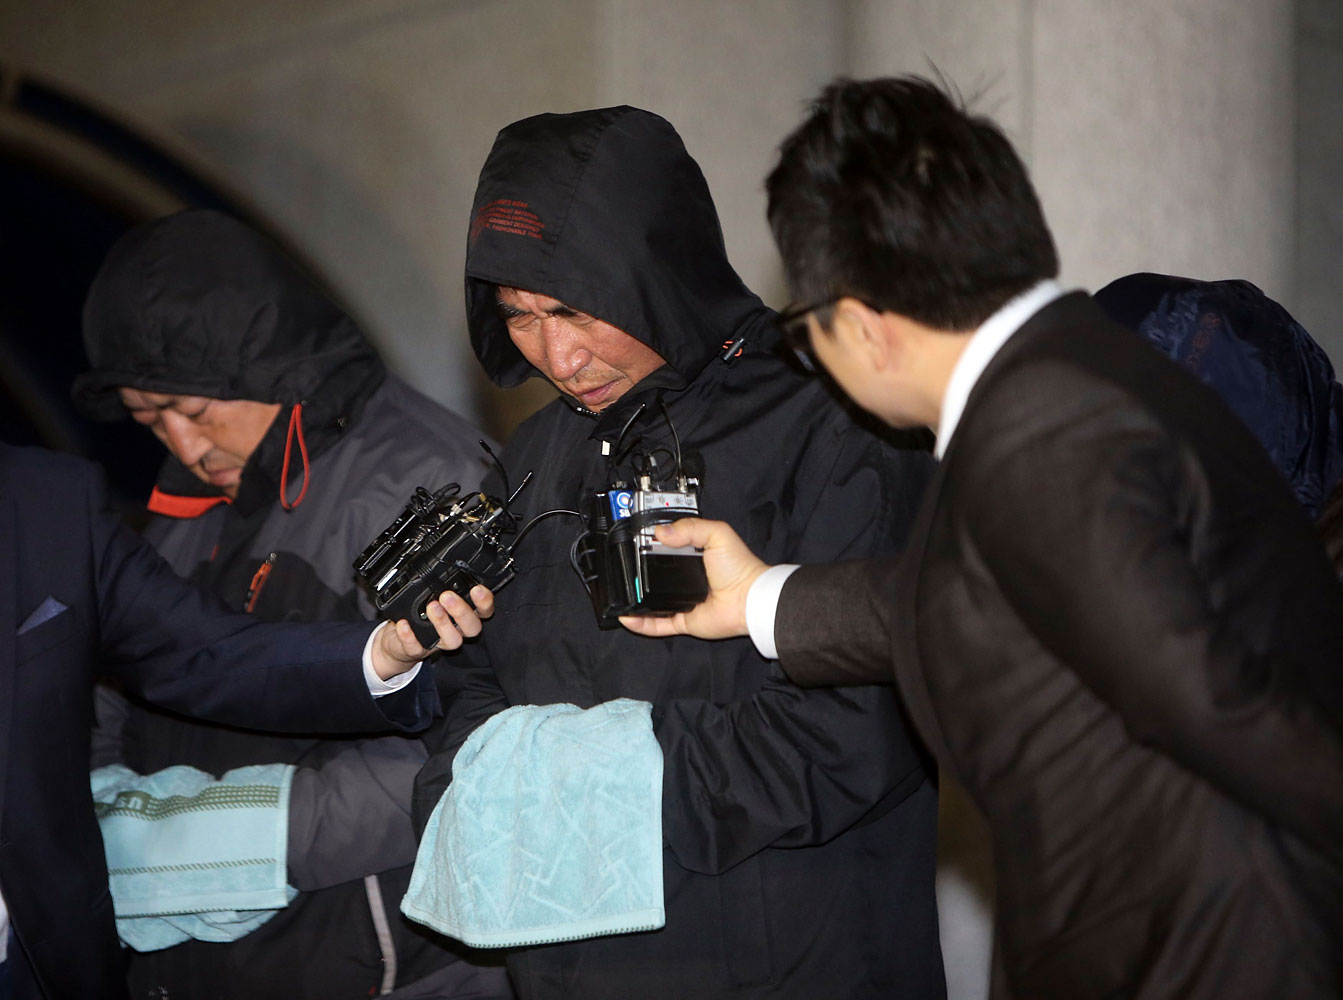 Journalists ask Lee Joon-seok, captain of South Korean ferry Sewol which sank at sea off Jindo, questions as Lee walked out of court after an investigation in Mokpo April 19, 2014.